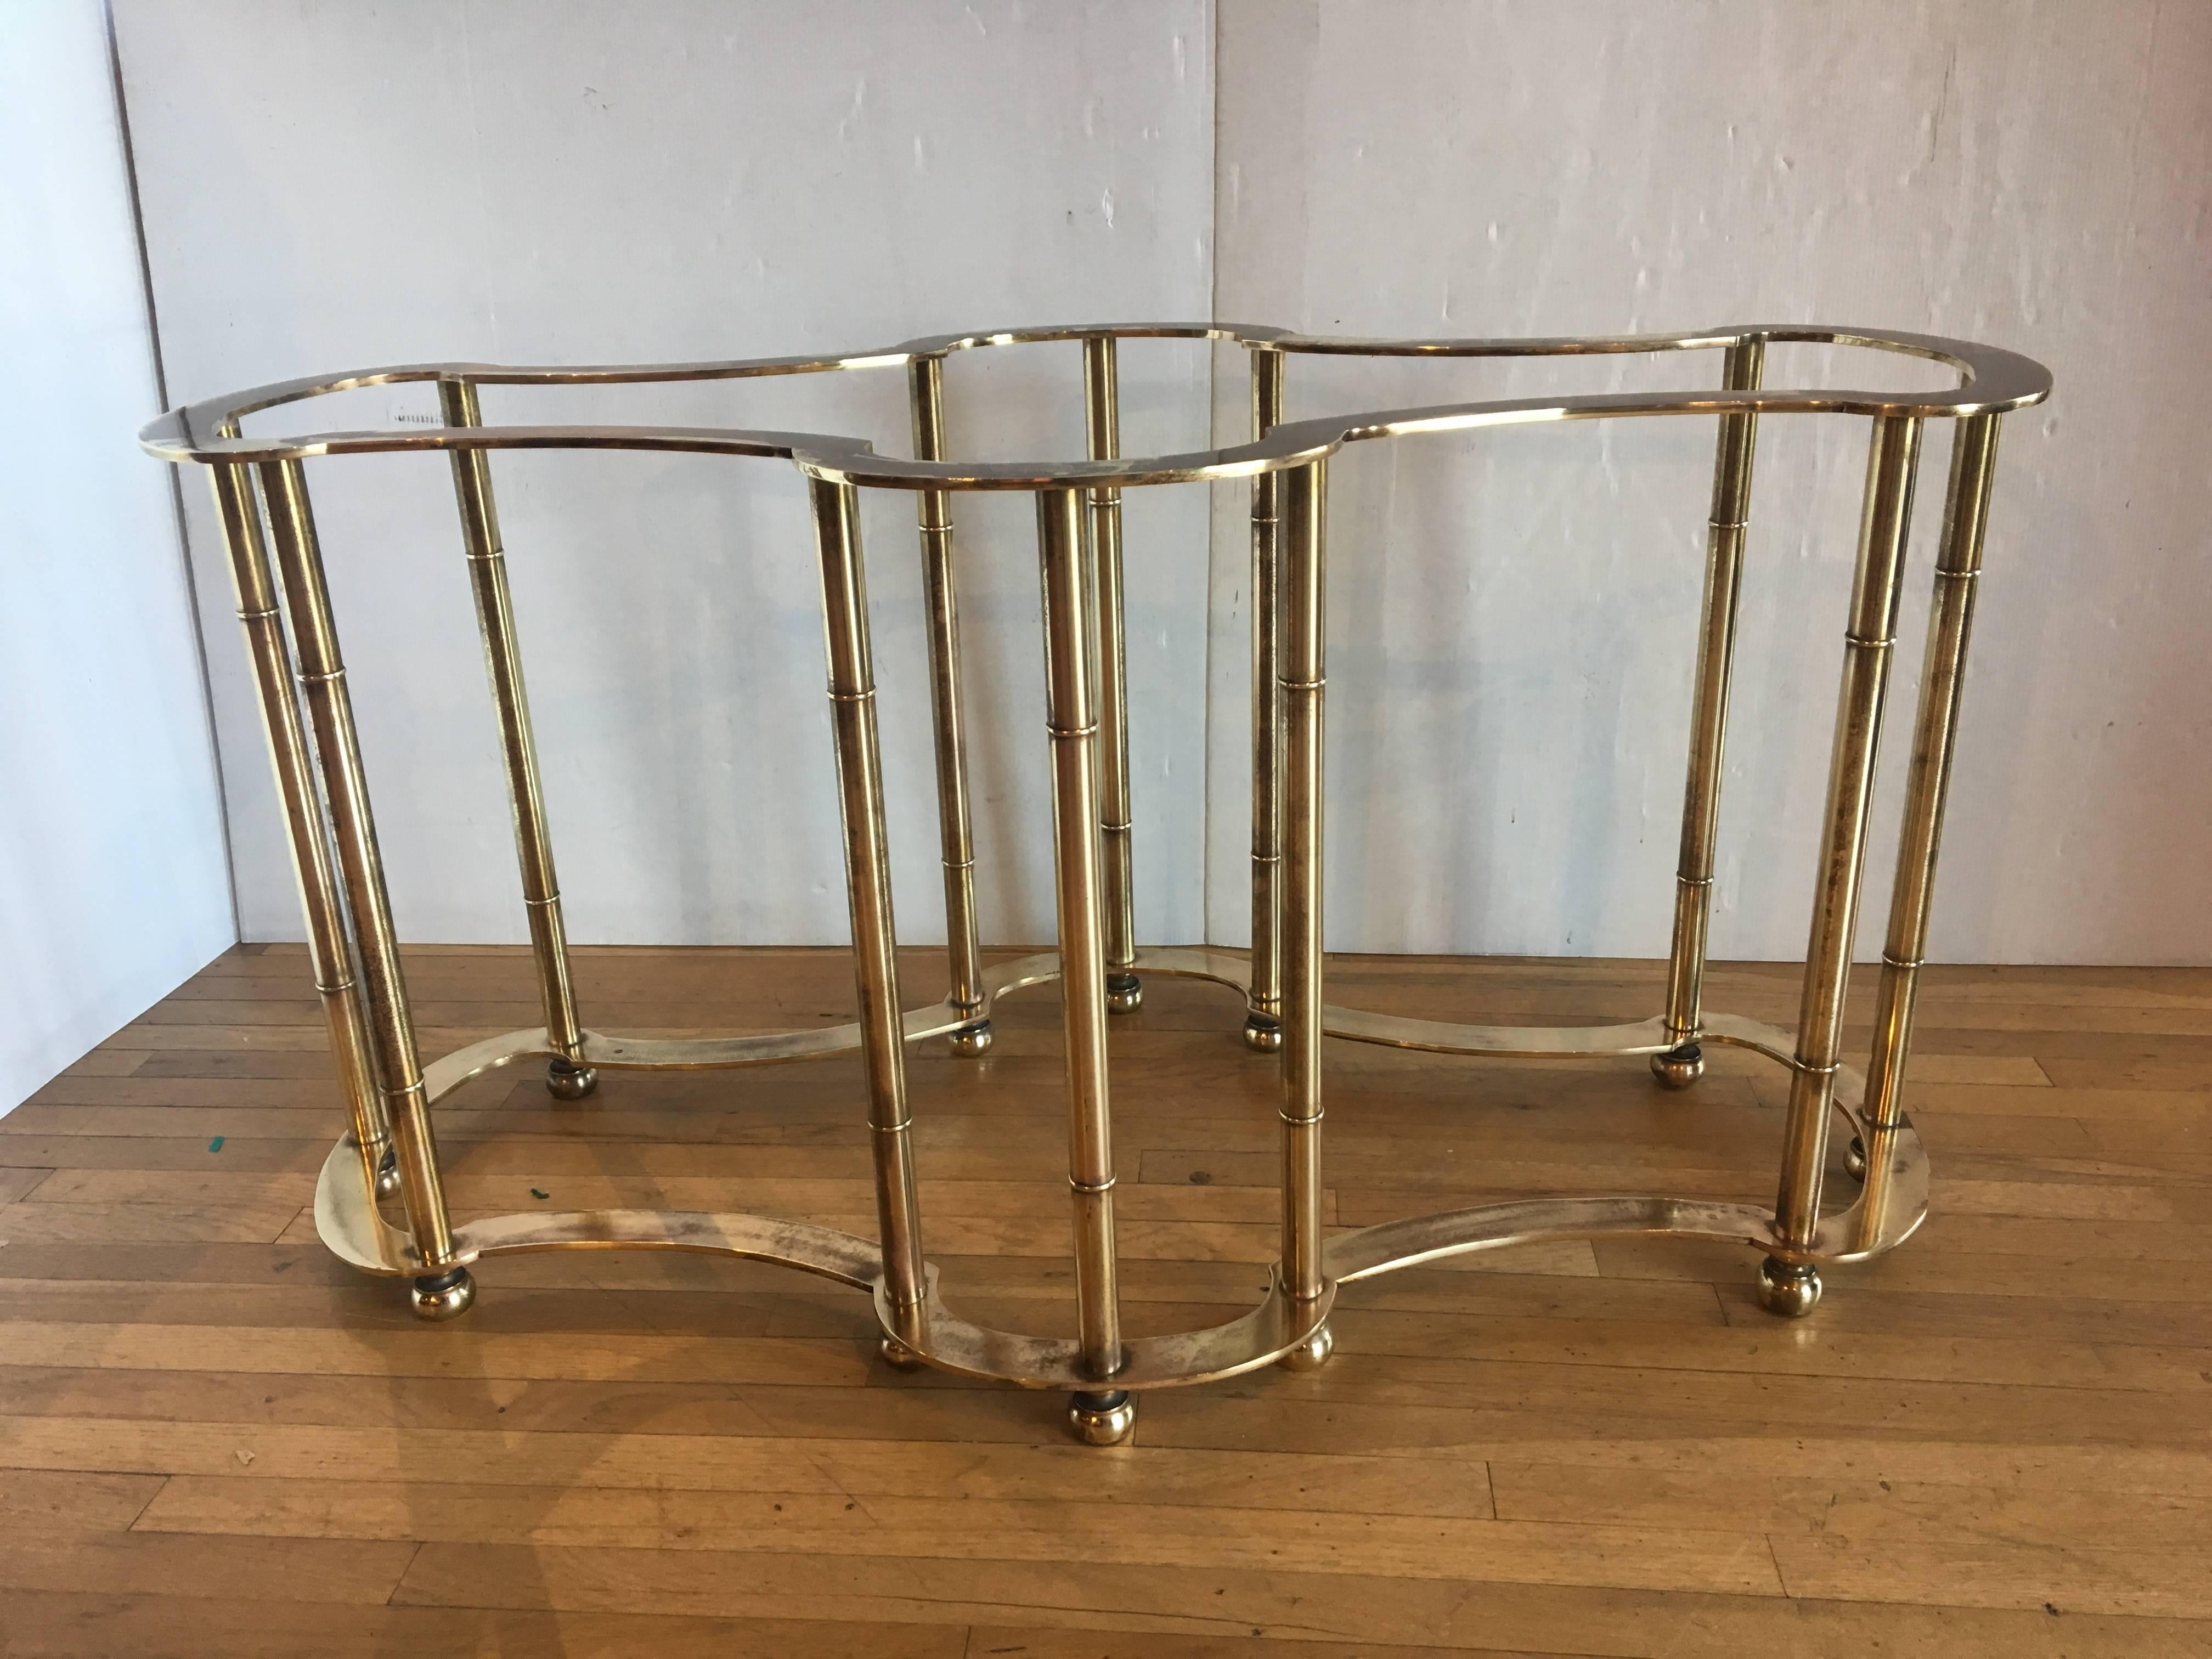 Hollywood Regency Massive, 1960s Solid Brass Racetrack Dining Table Base by Mastercraft